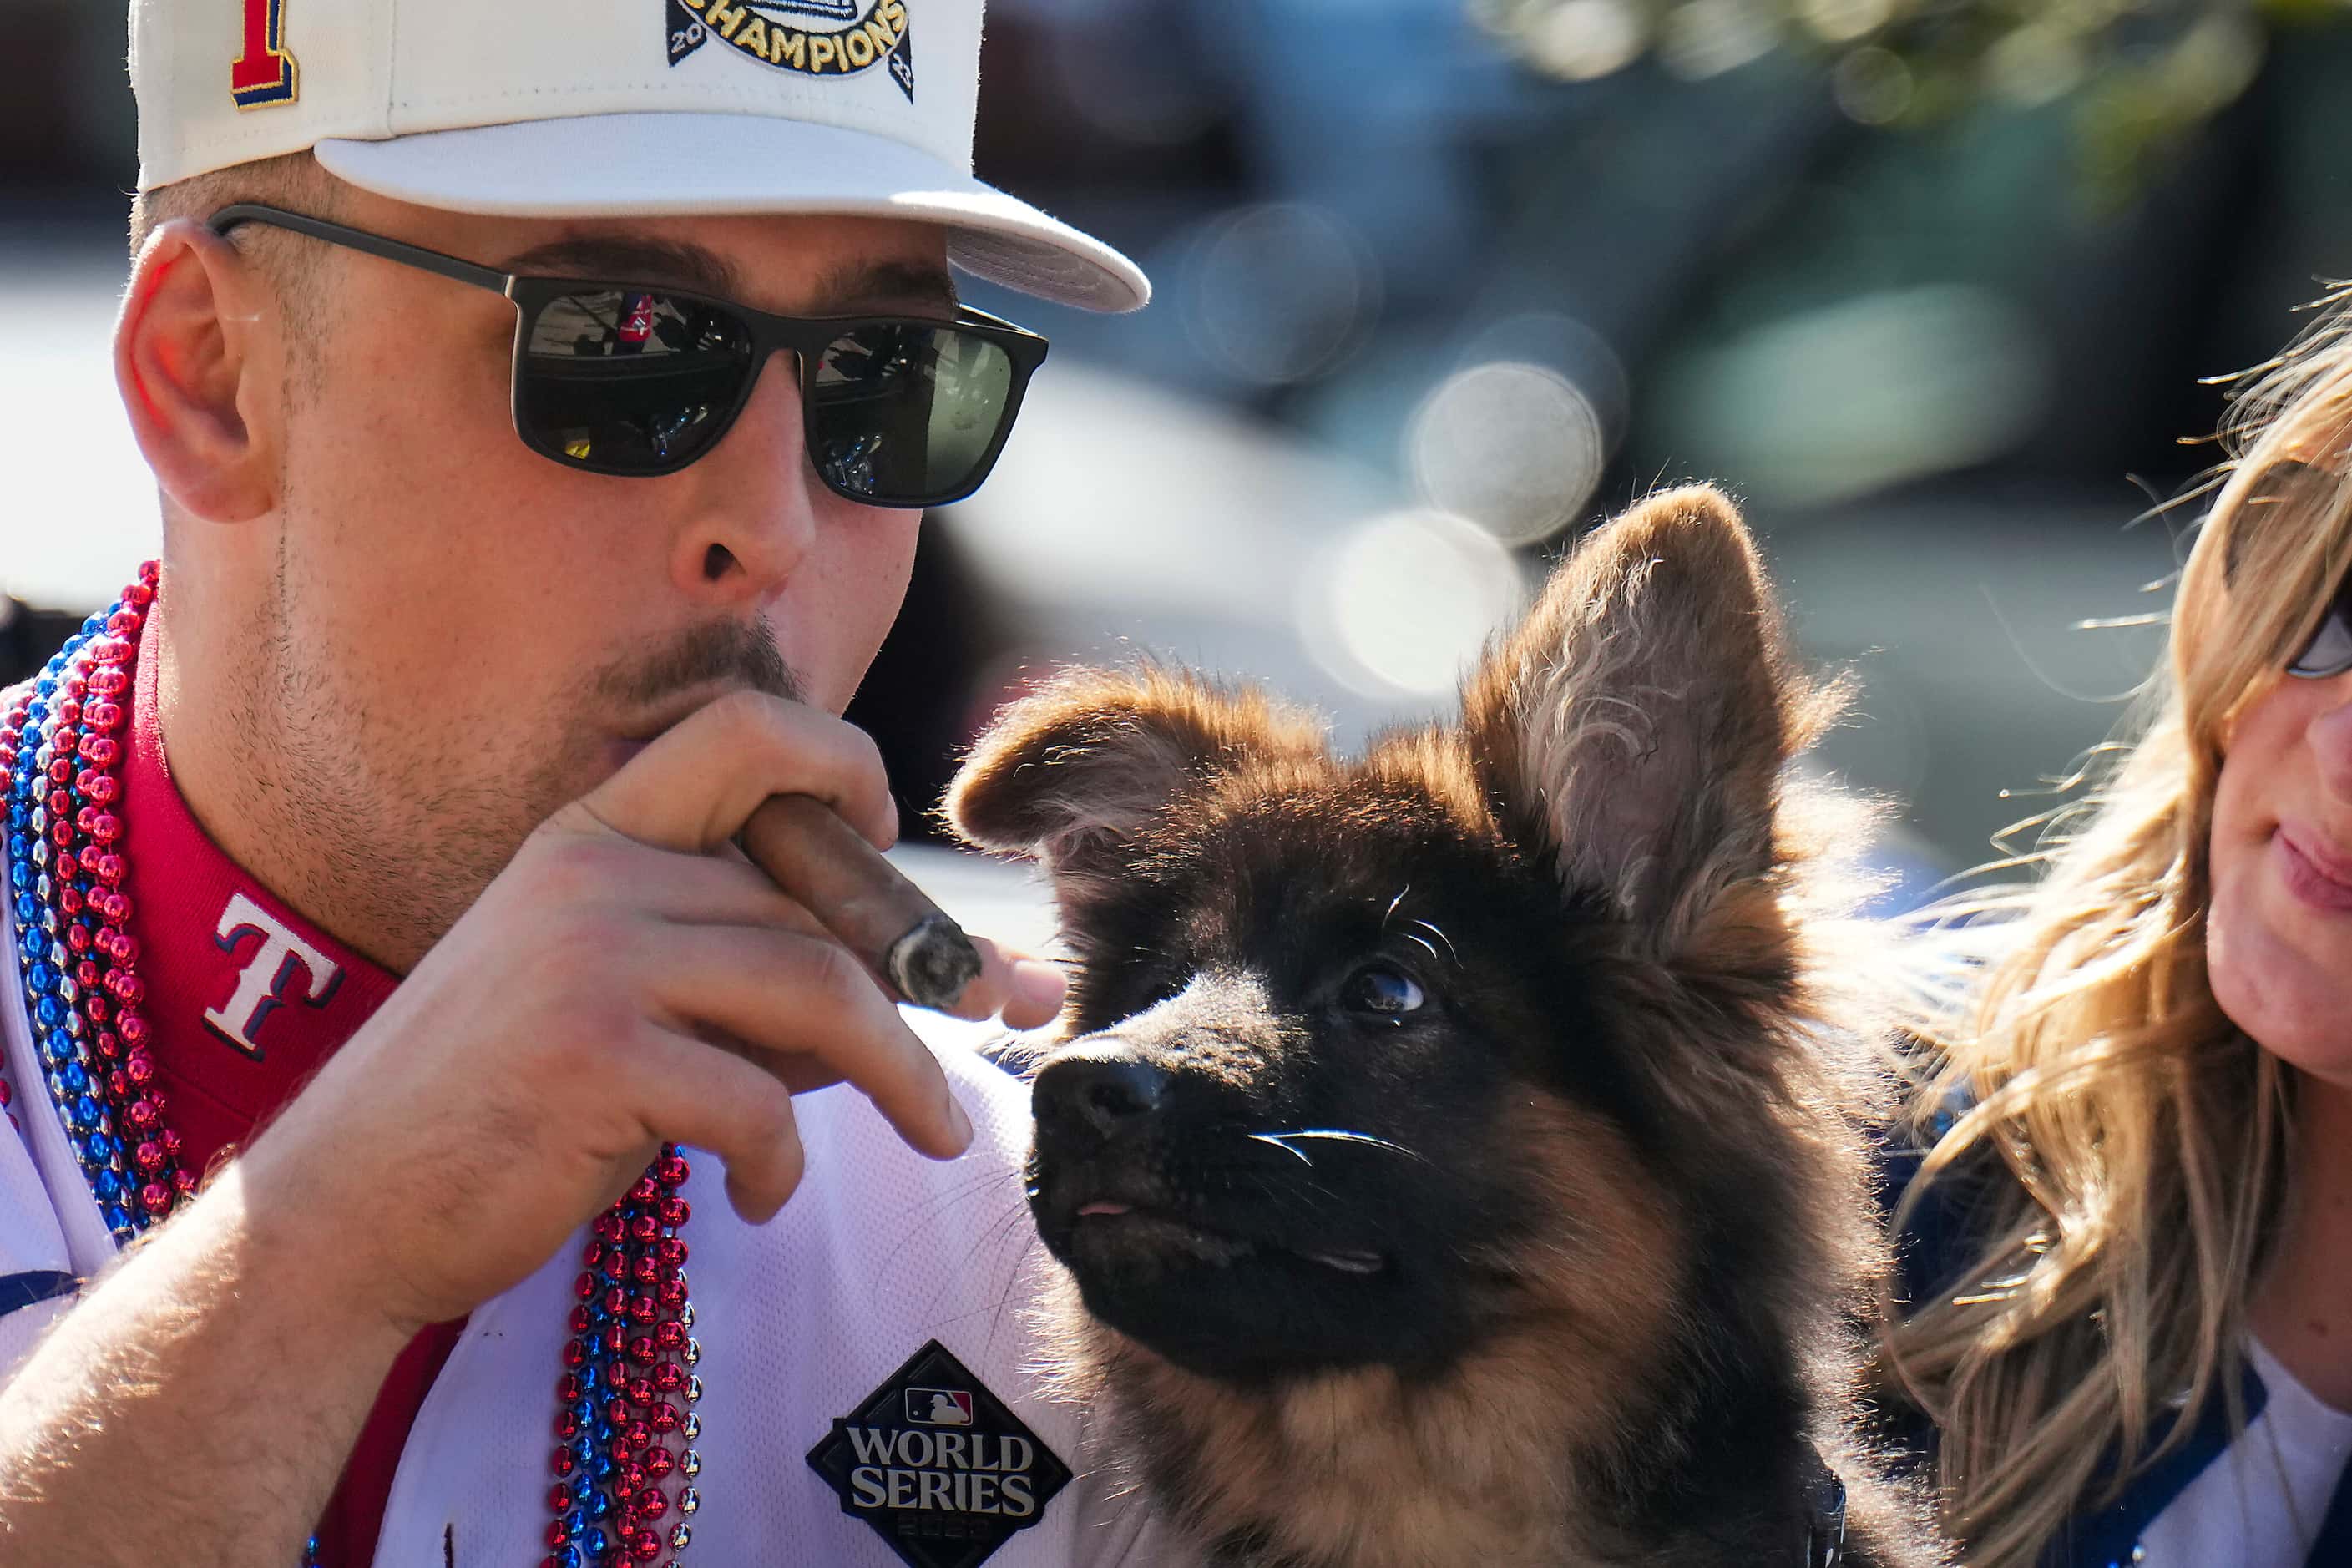 Texas Rangers first baseman Nathaniel Lowe smokes a cigar while riding a truck with his dog...